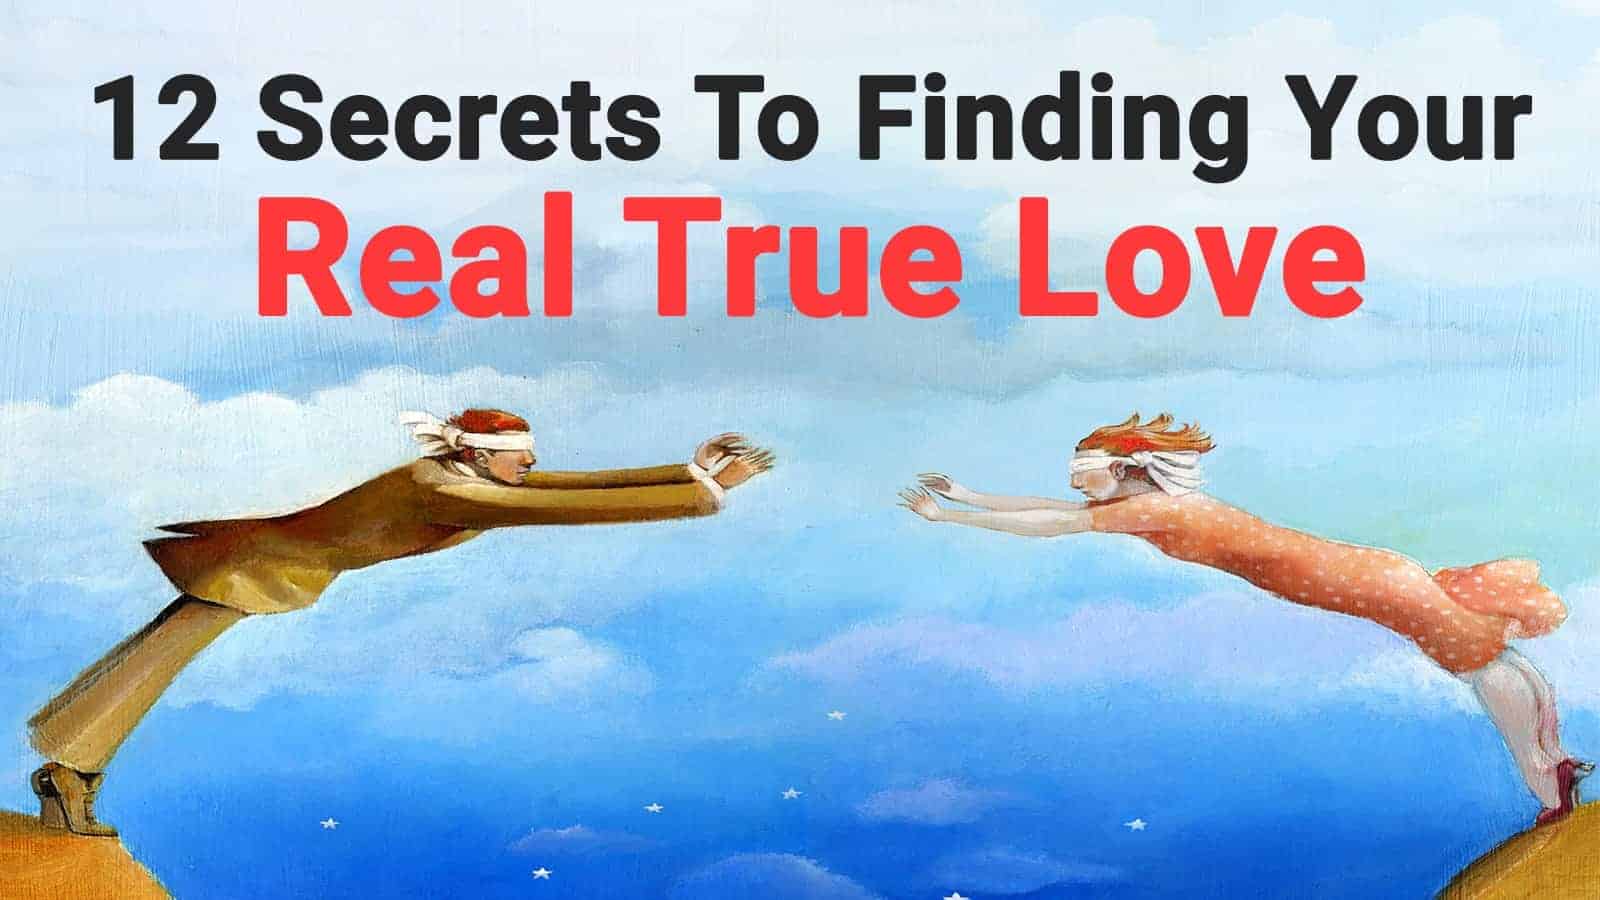 12 Secrets To Finding Your Real True Love